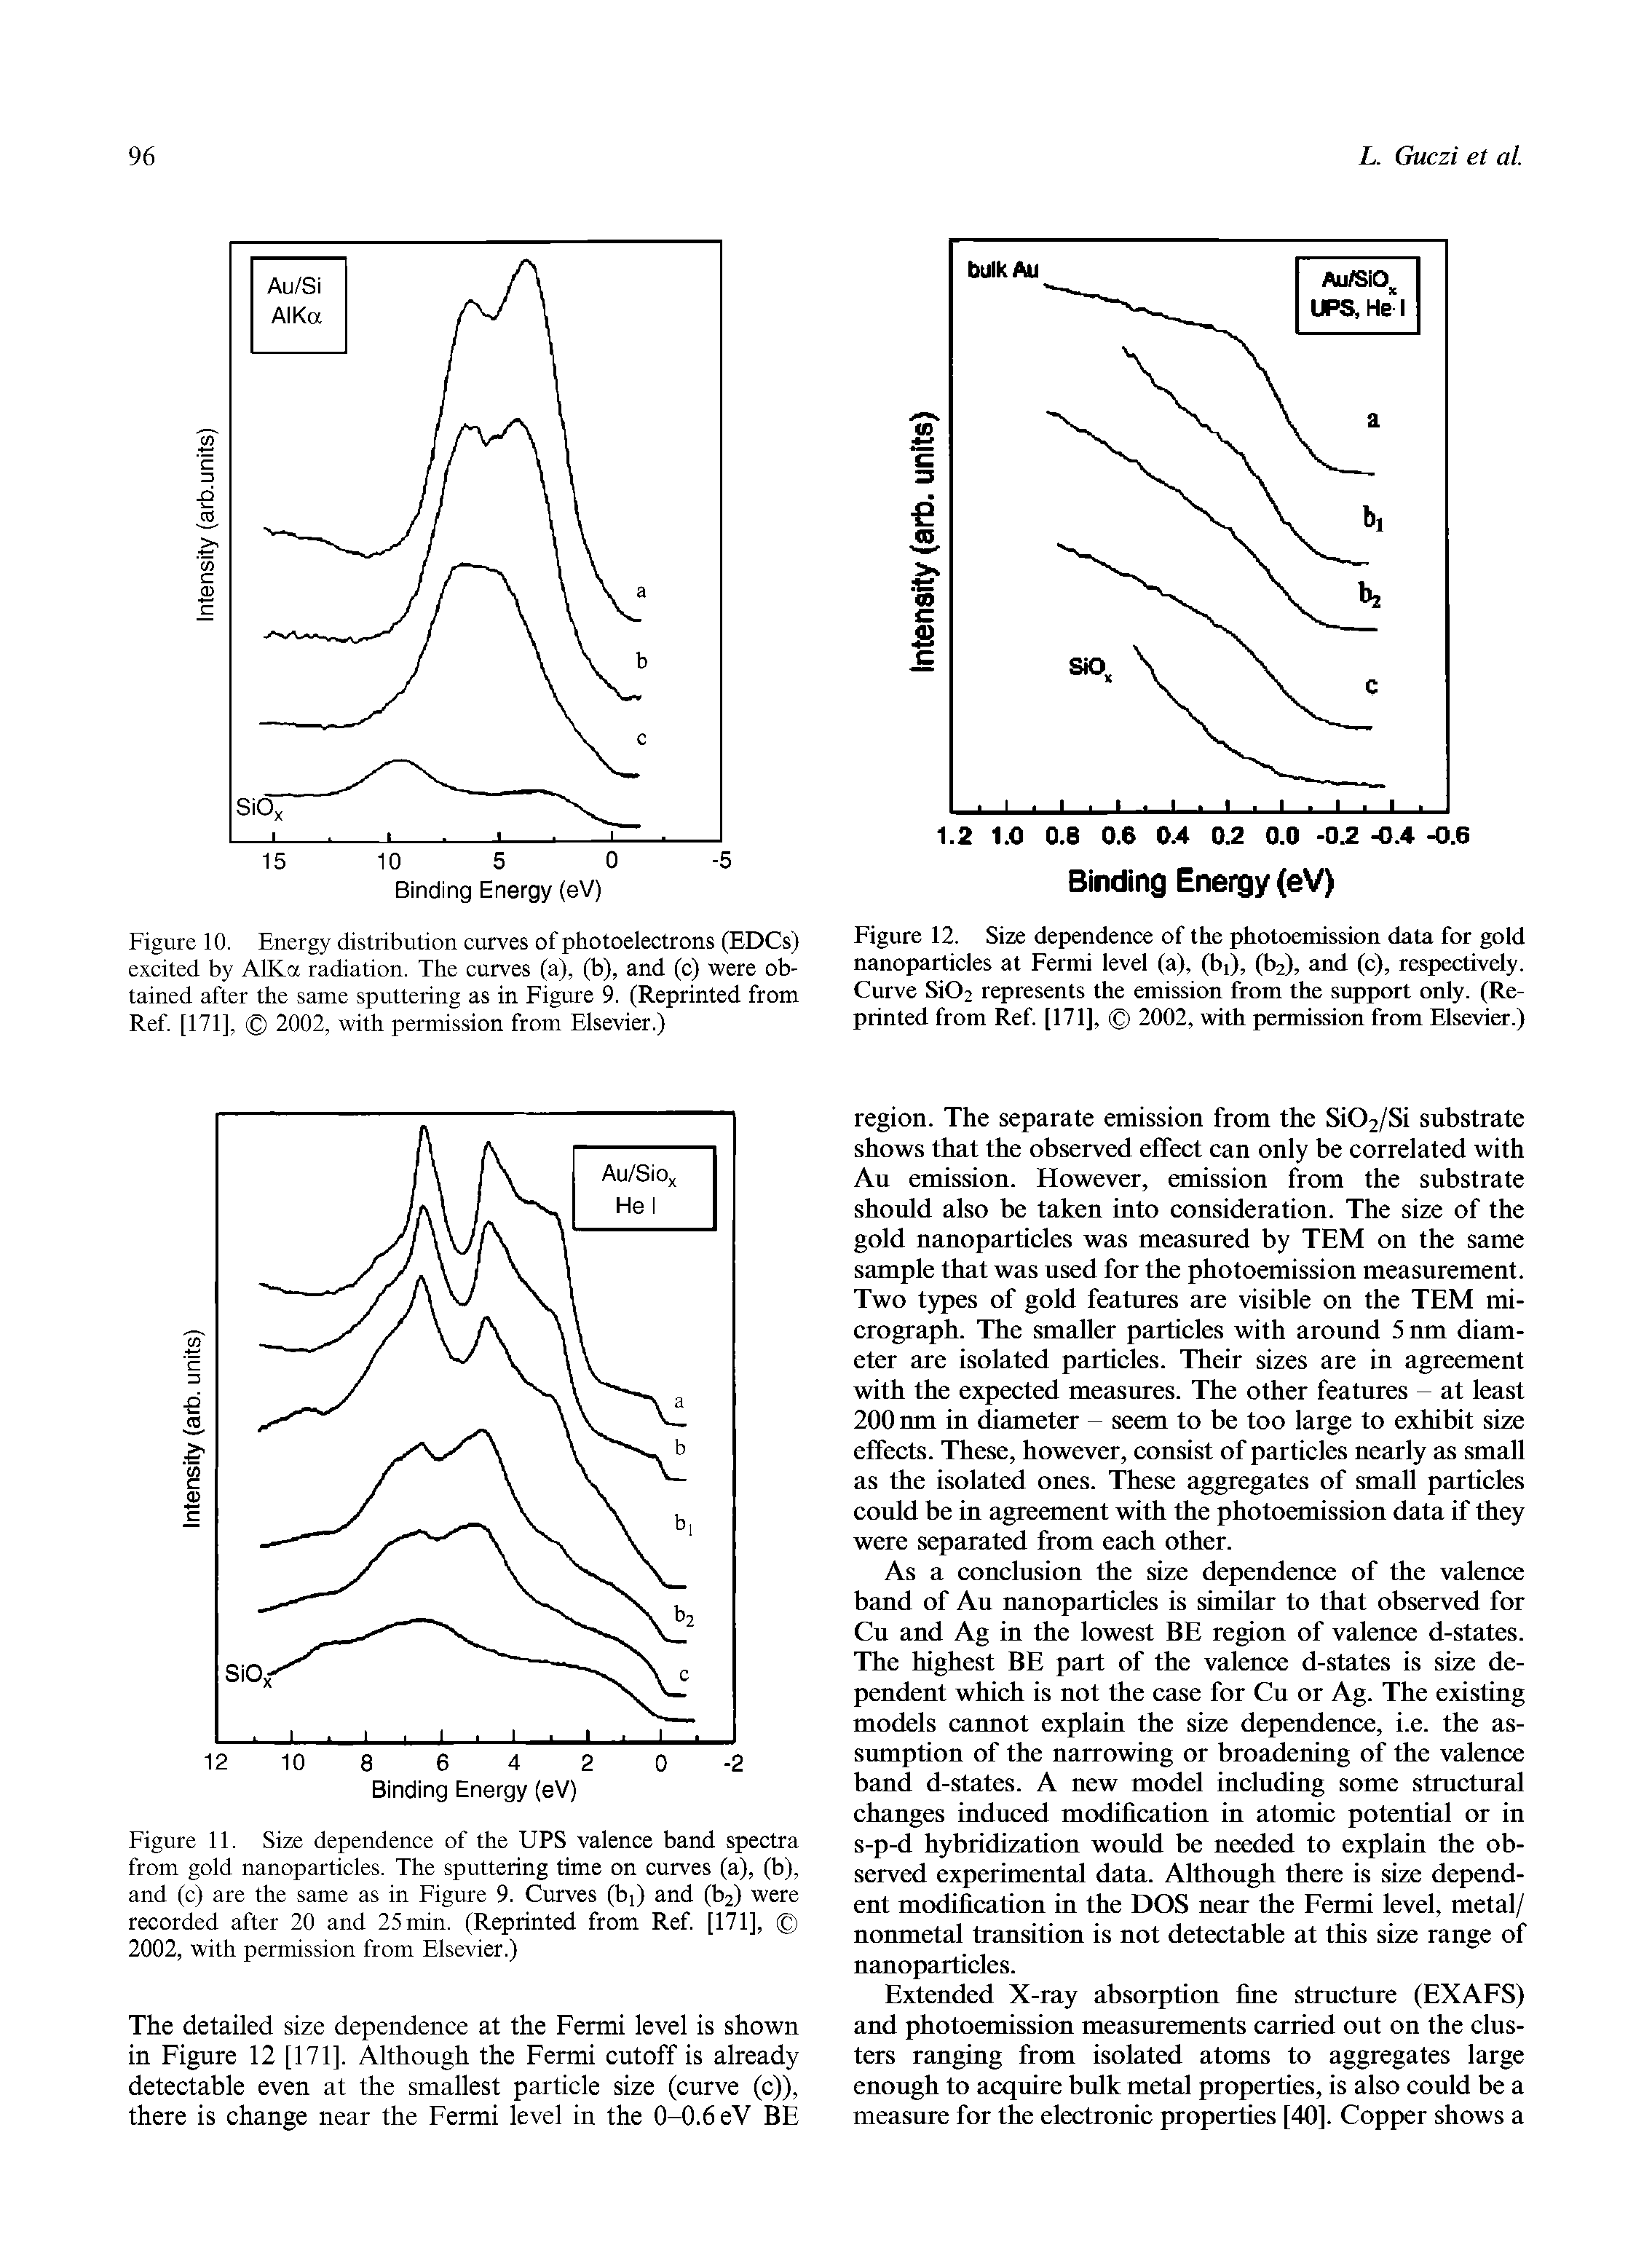 Figure 10. Energy distribution curves of photoelectrons (EDCs) excited by AlKa radiation. The curves (a), (b), and (c) were obtained after the same sputtering as in Figure 9. (Reprinted from Ref [171], 2002, with permission from Elsevier.)...